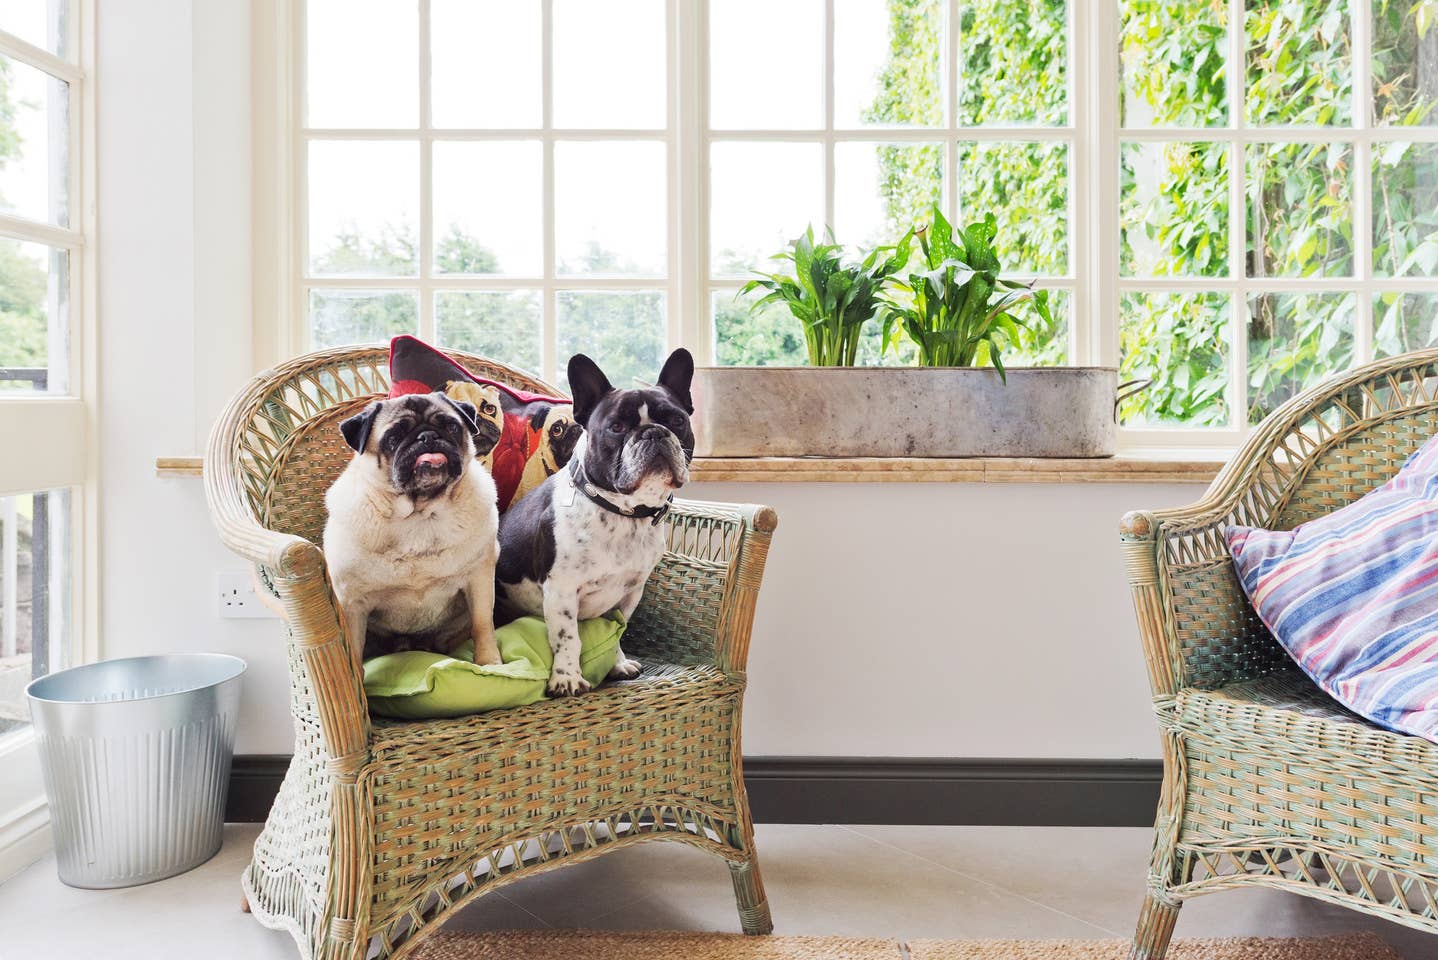 Self-Catering Accommodation Breakfast Room at Manor Suite at Moylgare Manor with a pug and french bulldog on a chair